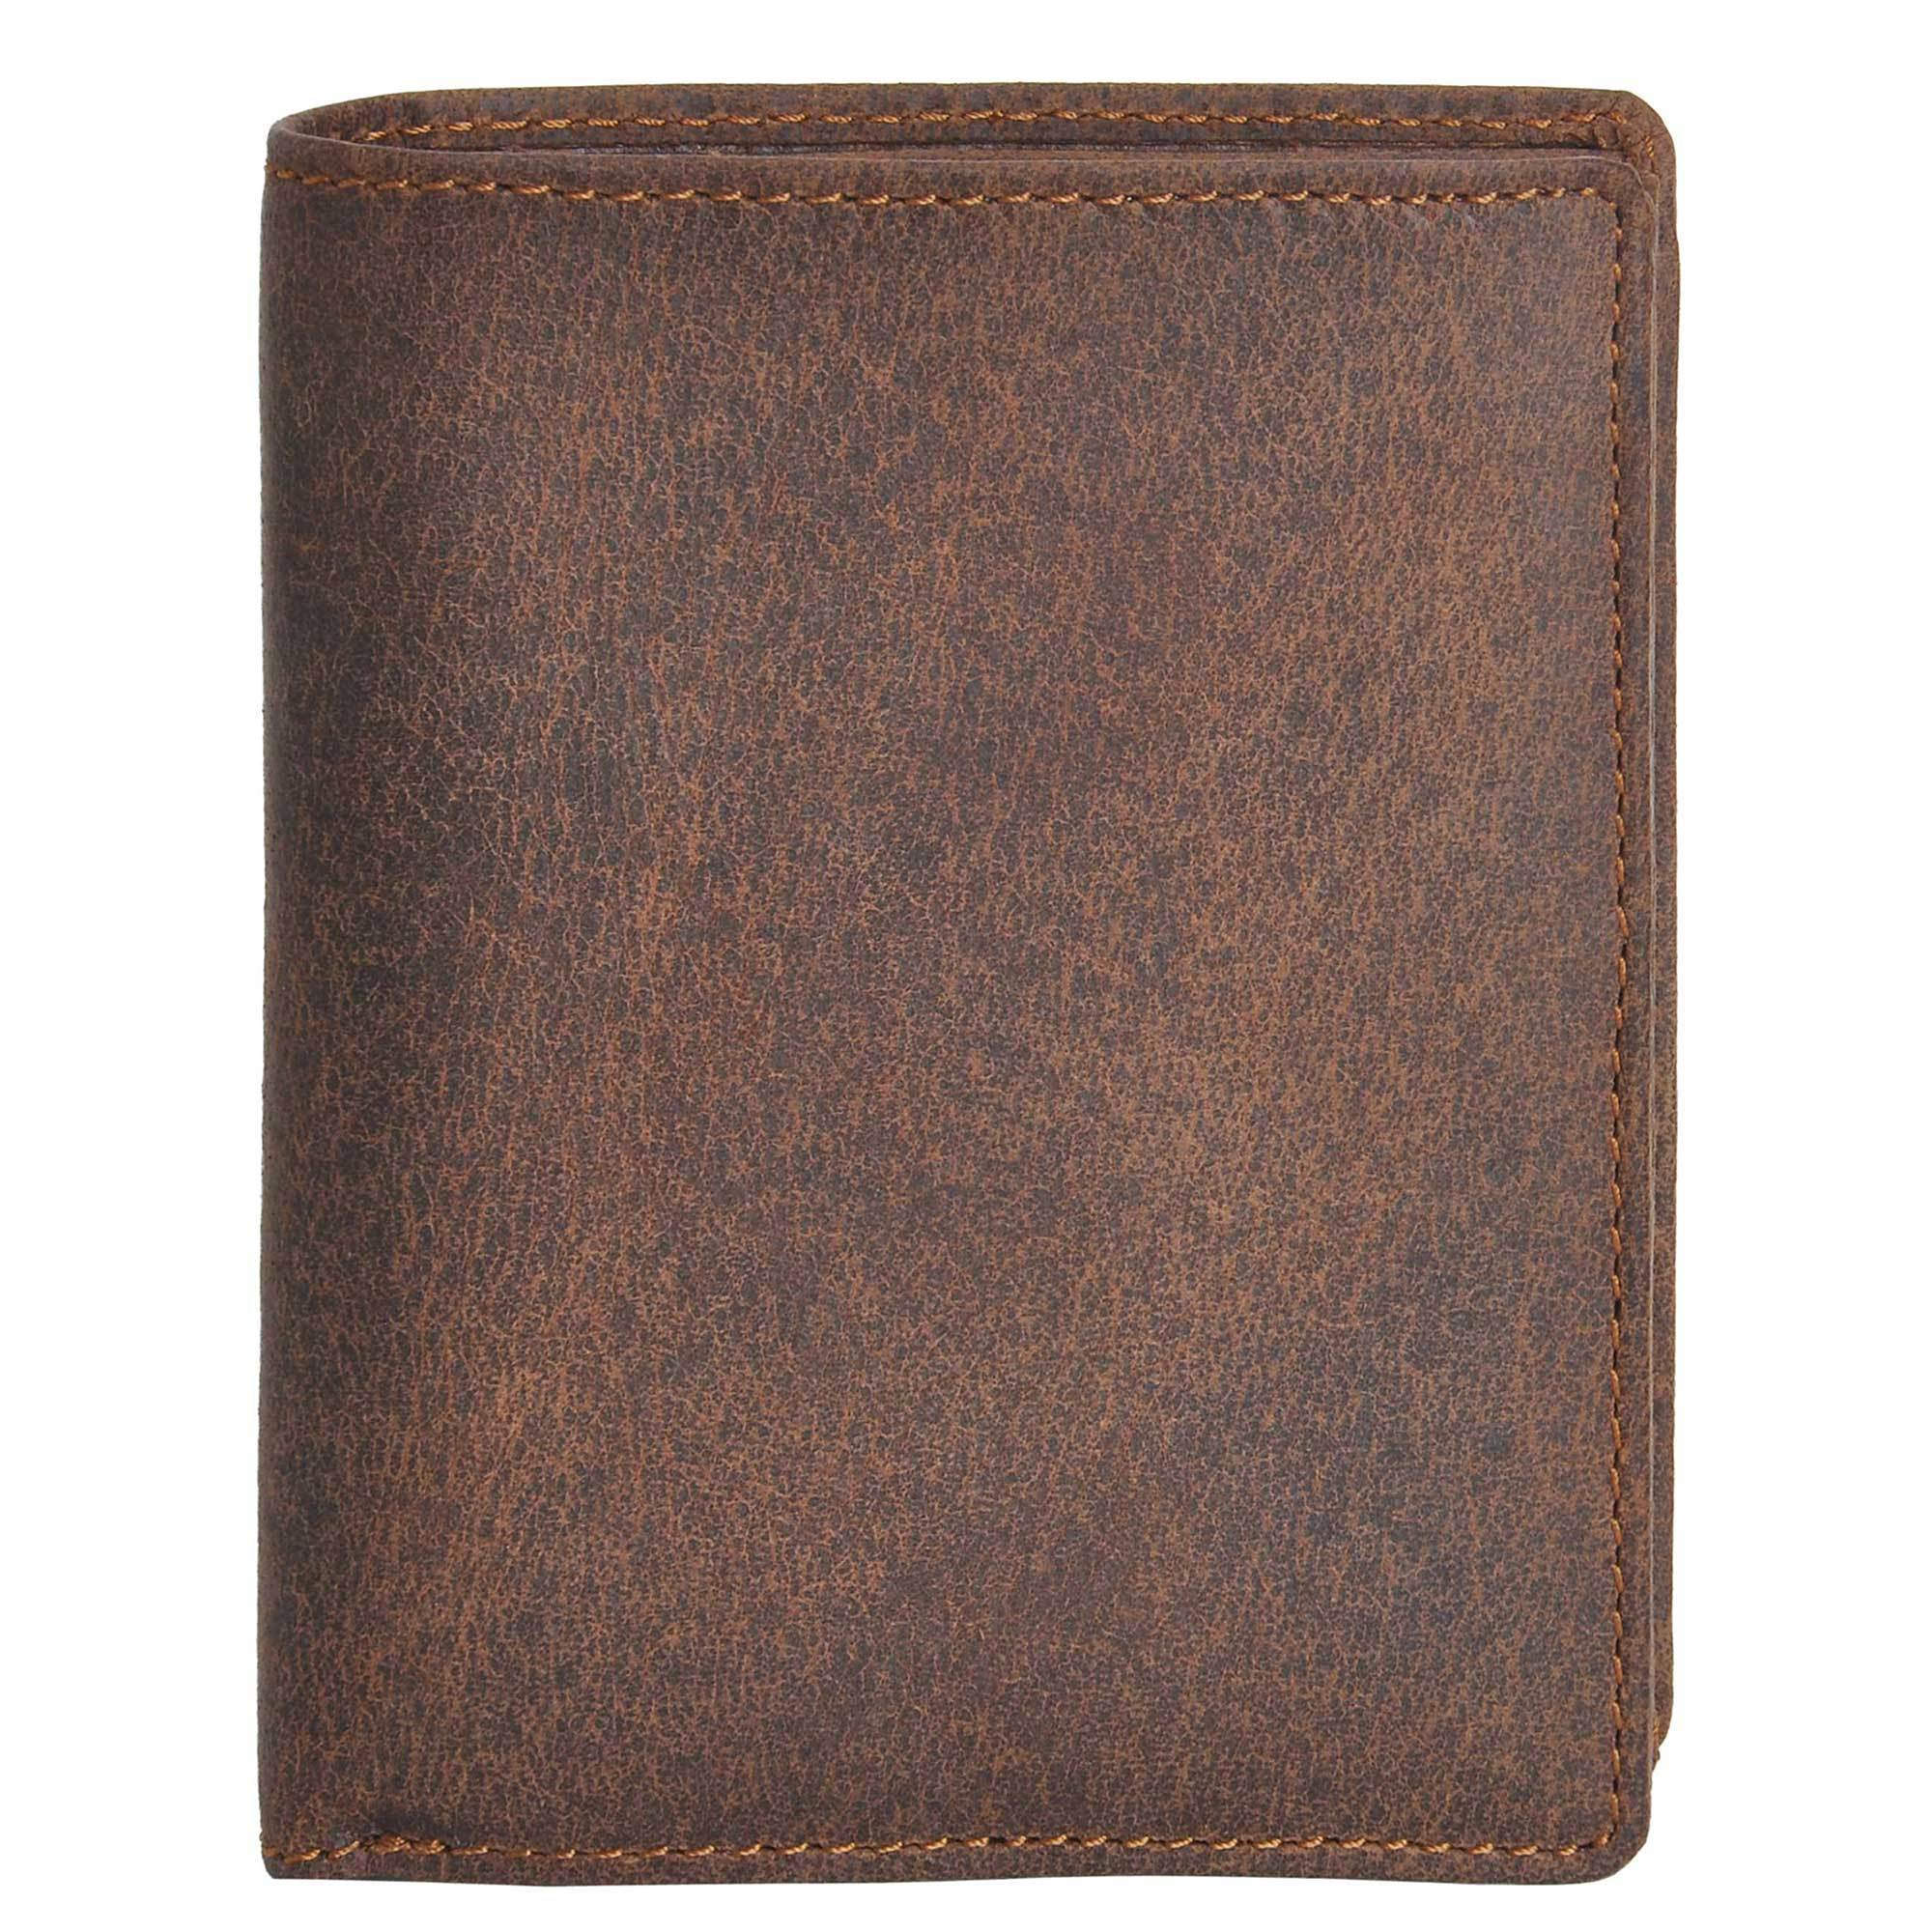 DiLoro Men's Vertical Leather Bifold Flip ID Zip Coin Wallet in Dark Hunter Brown with RFID Protection - Front View